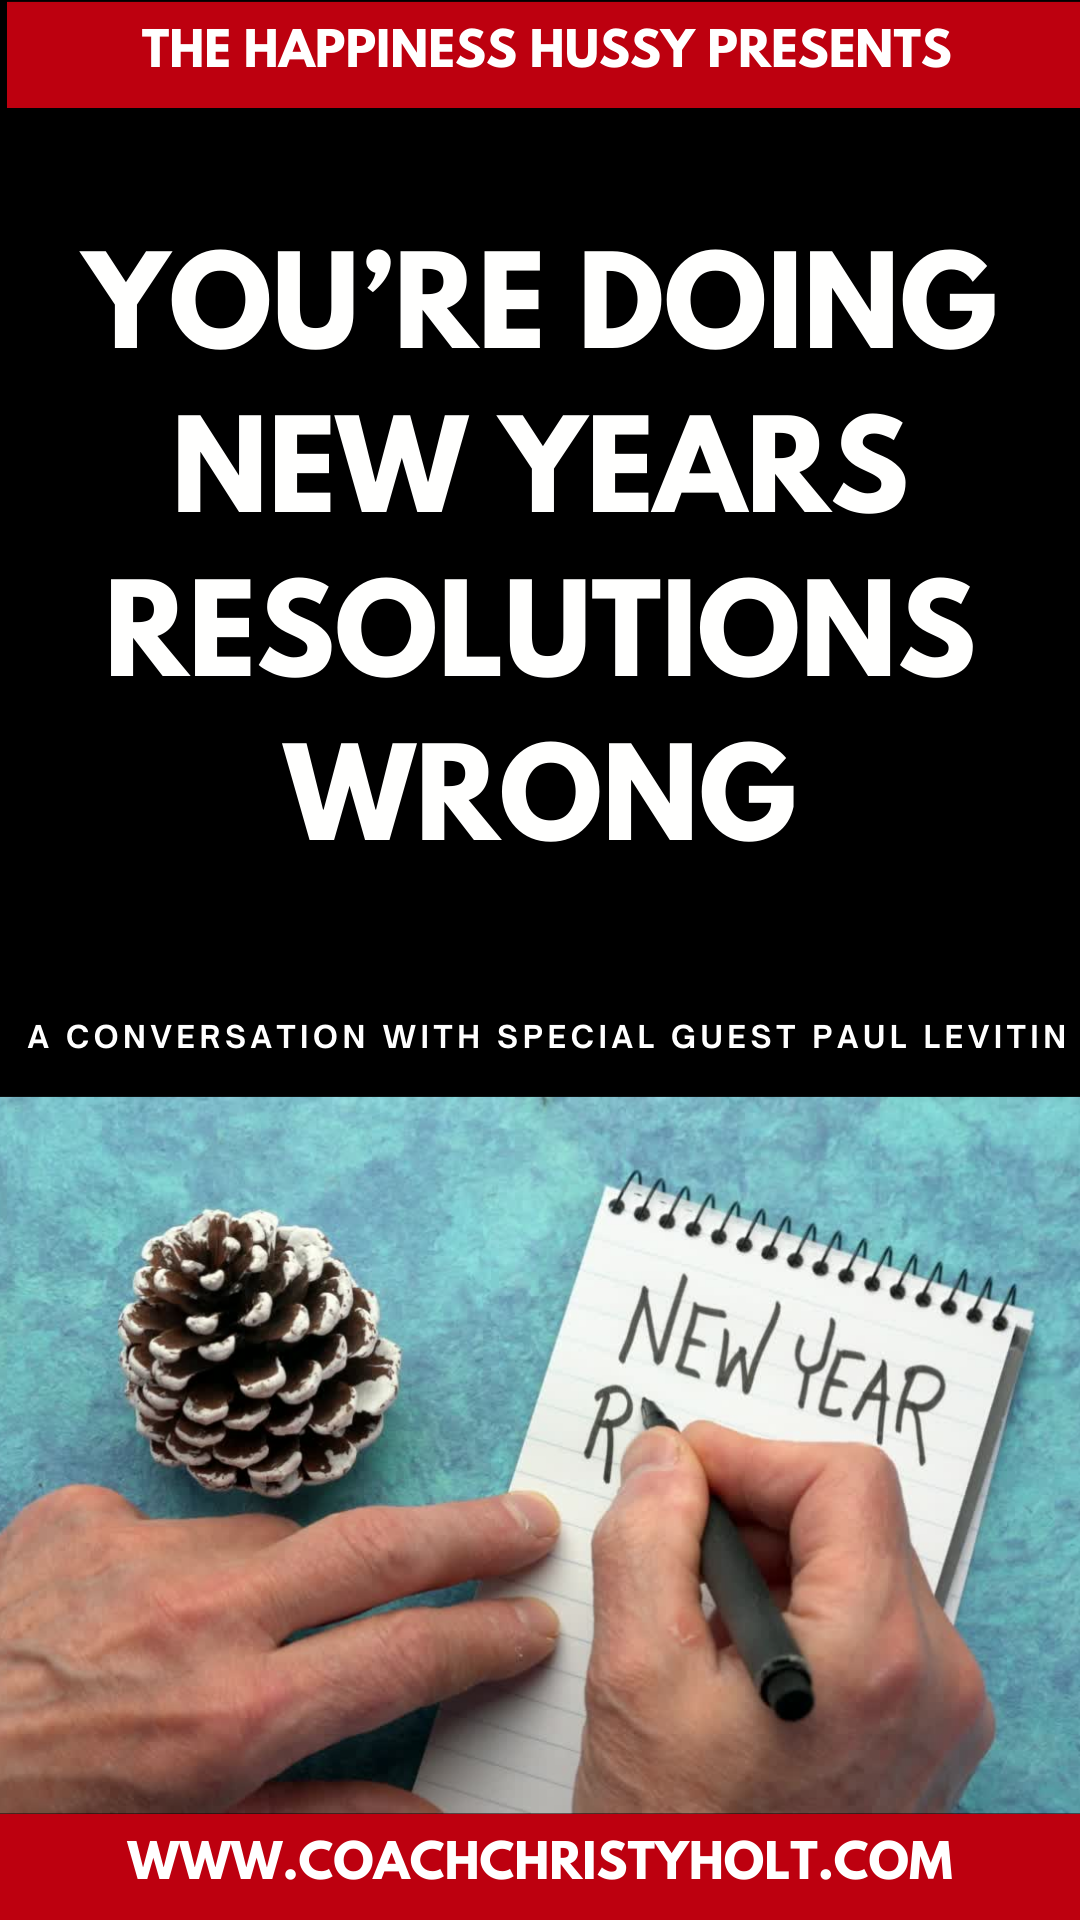 You're Doing New Years Resolutions WRONG!